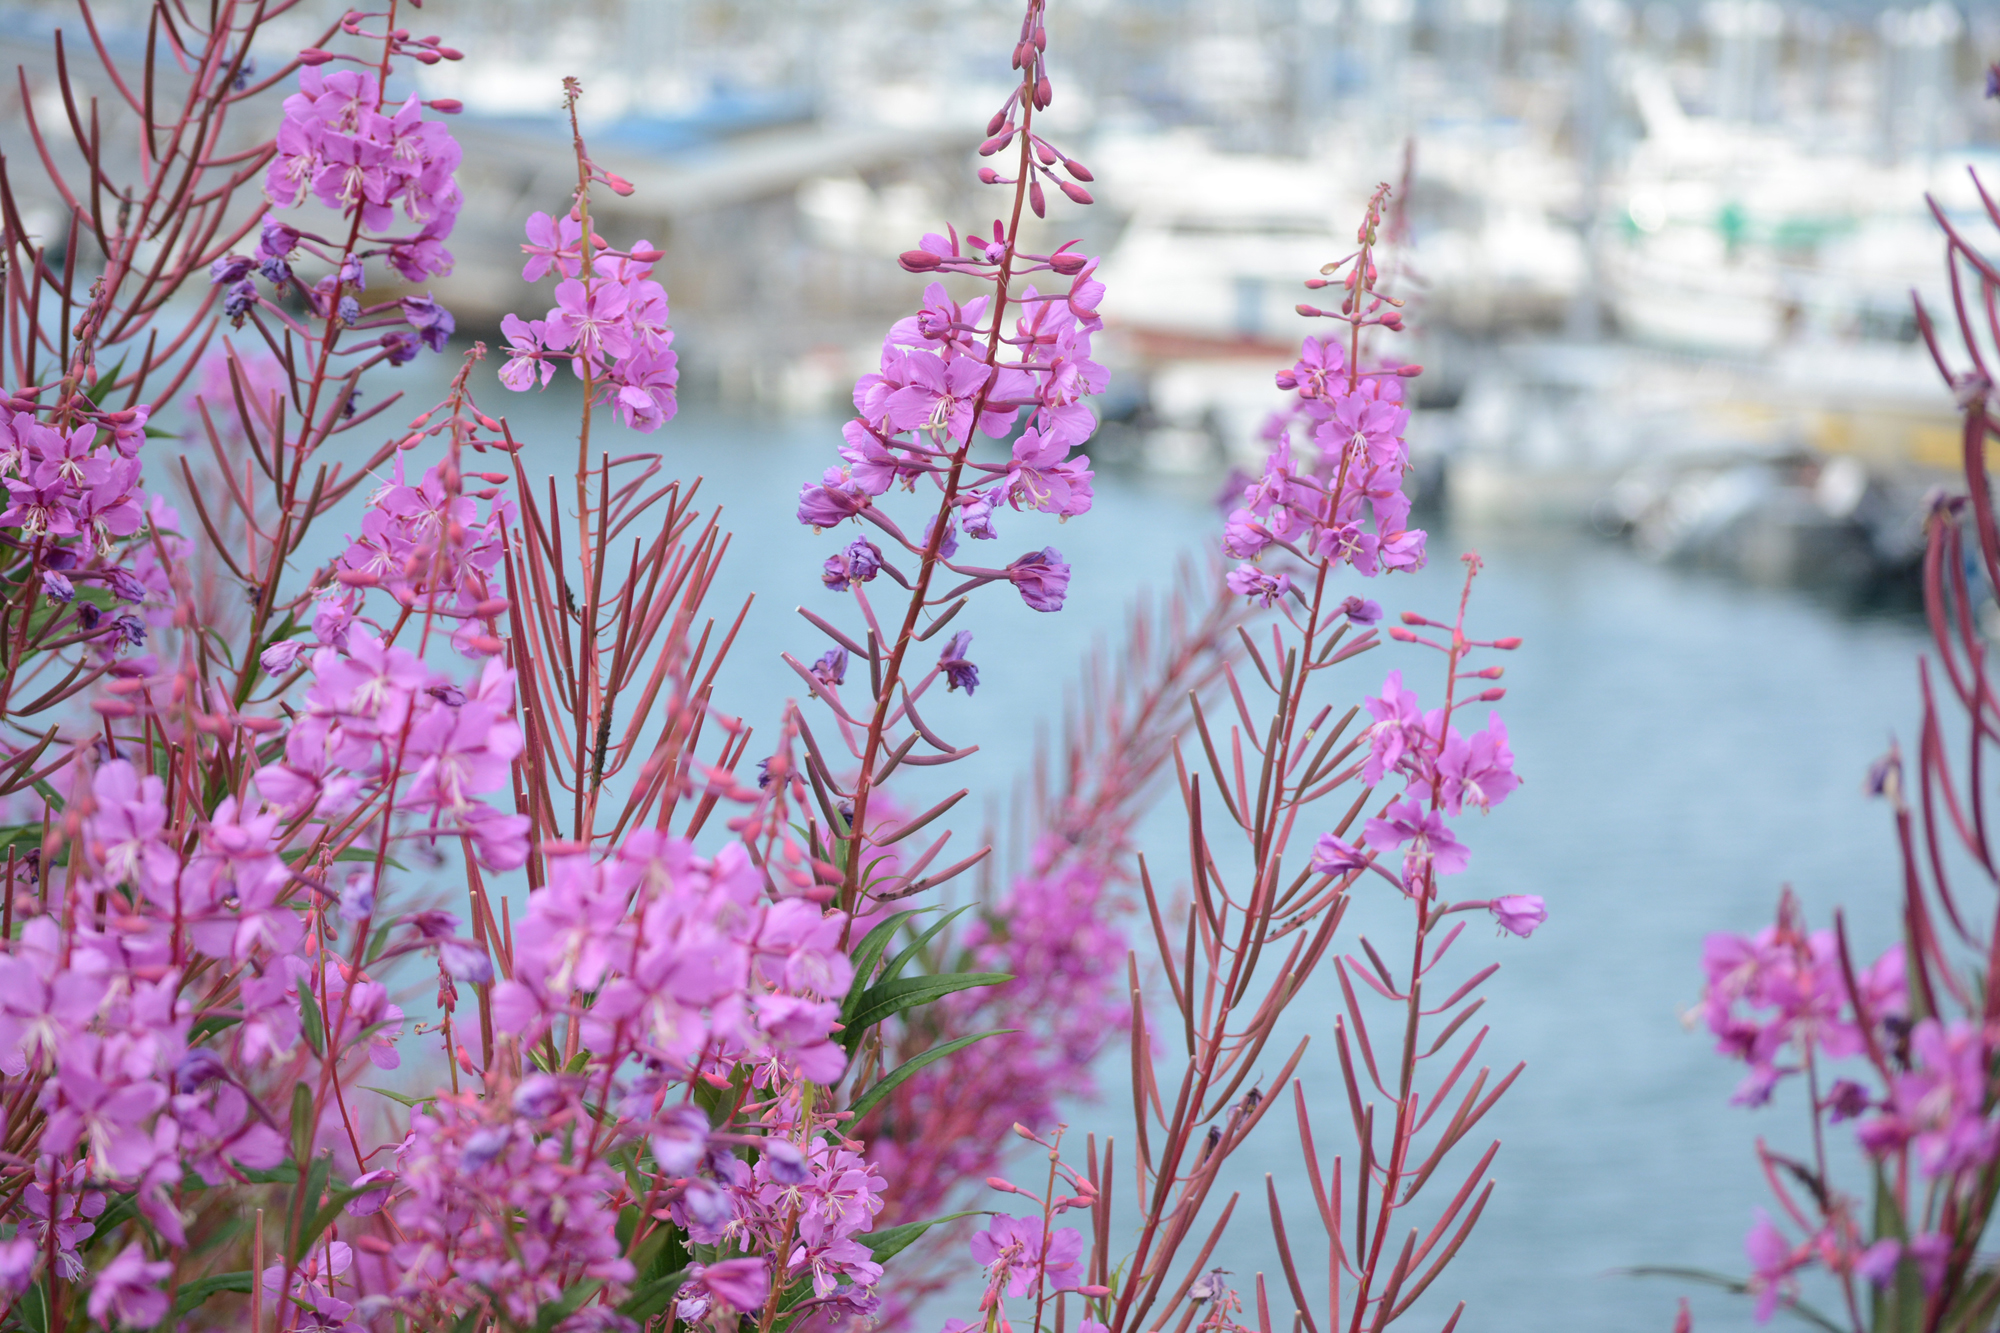 Petals have started to fall off fireweed at the Homer Harbor on Tuesday — a sign that summer is either early or already fading.-Photo by Michael Armstrong